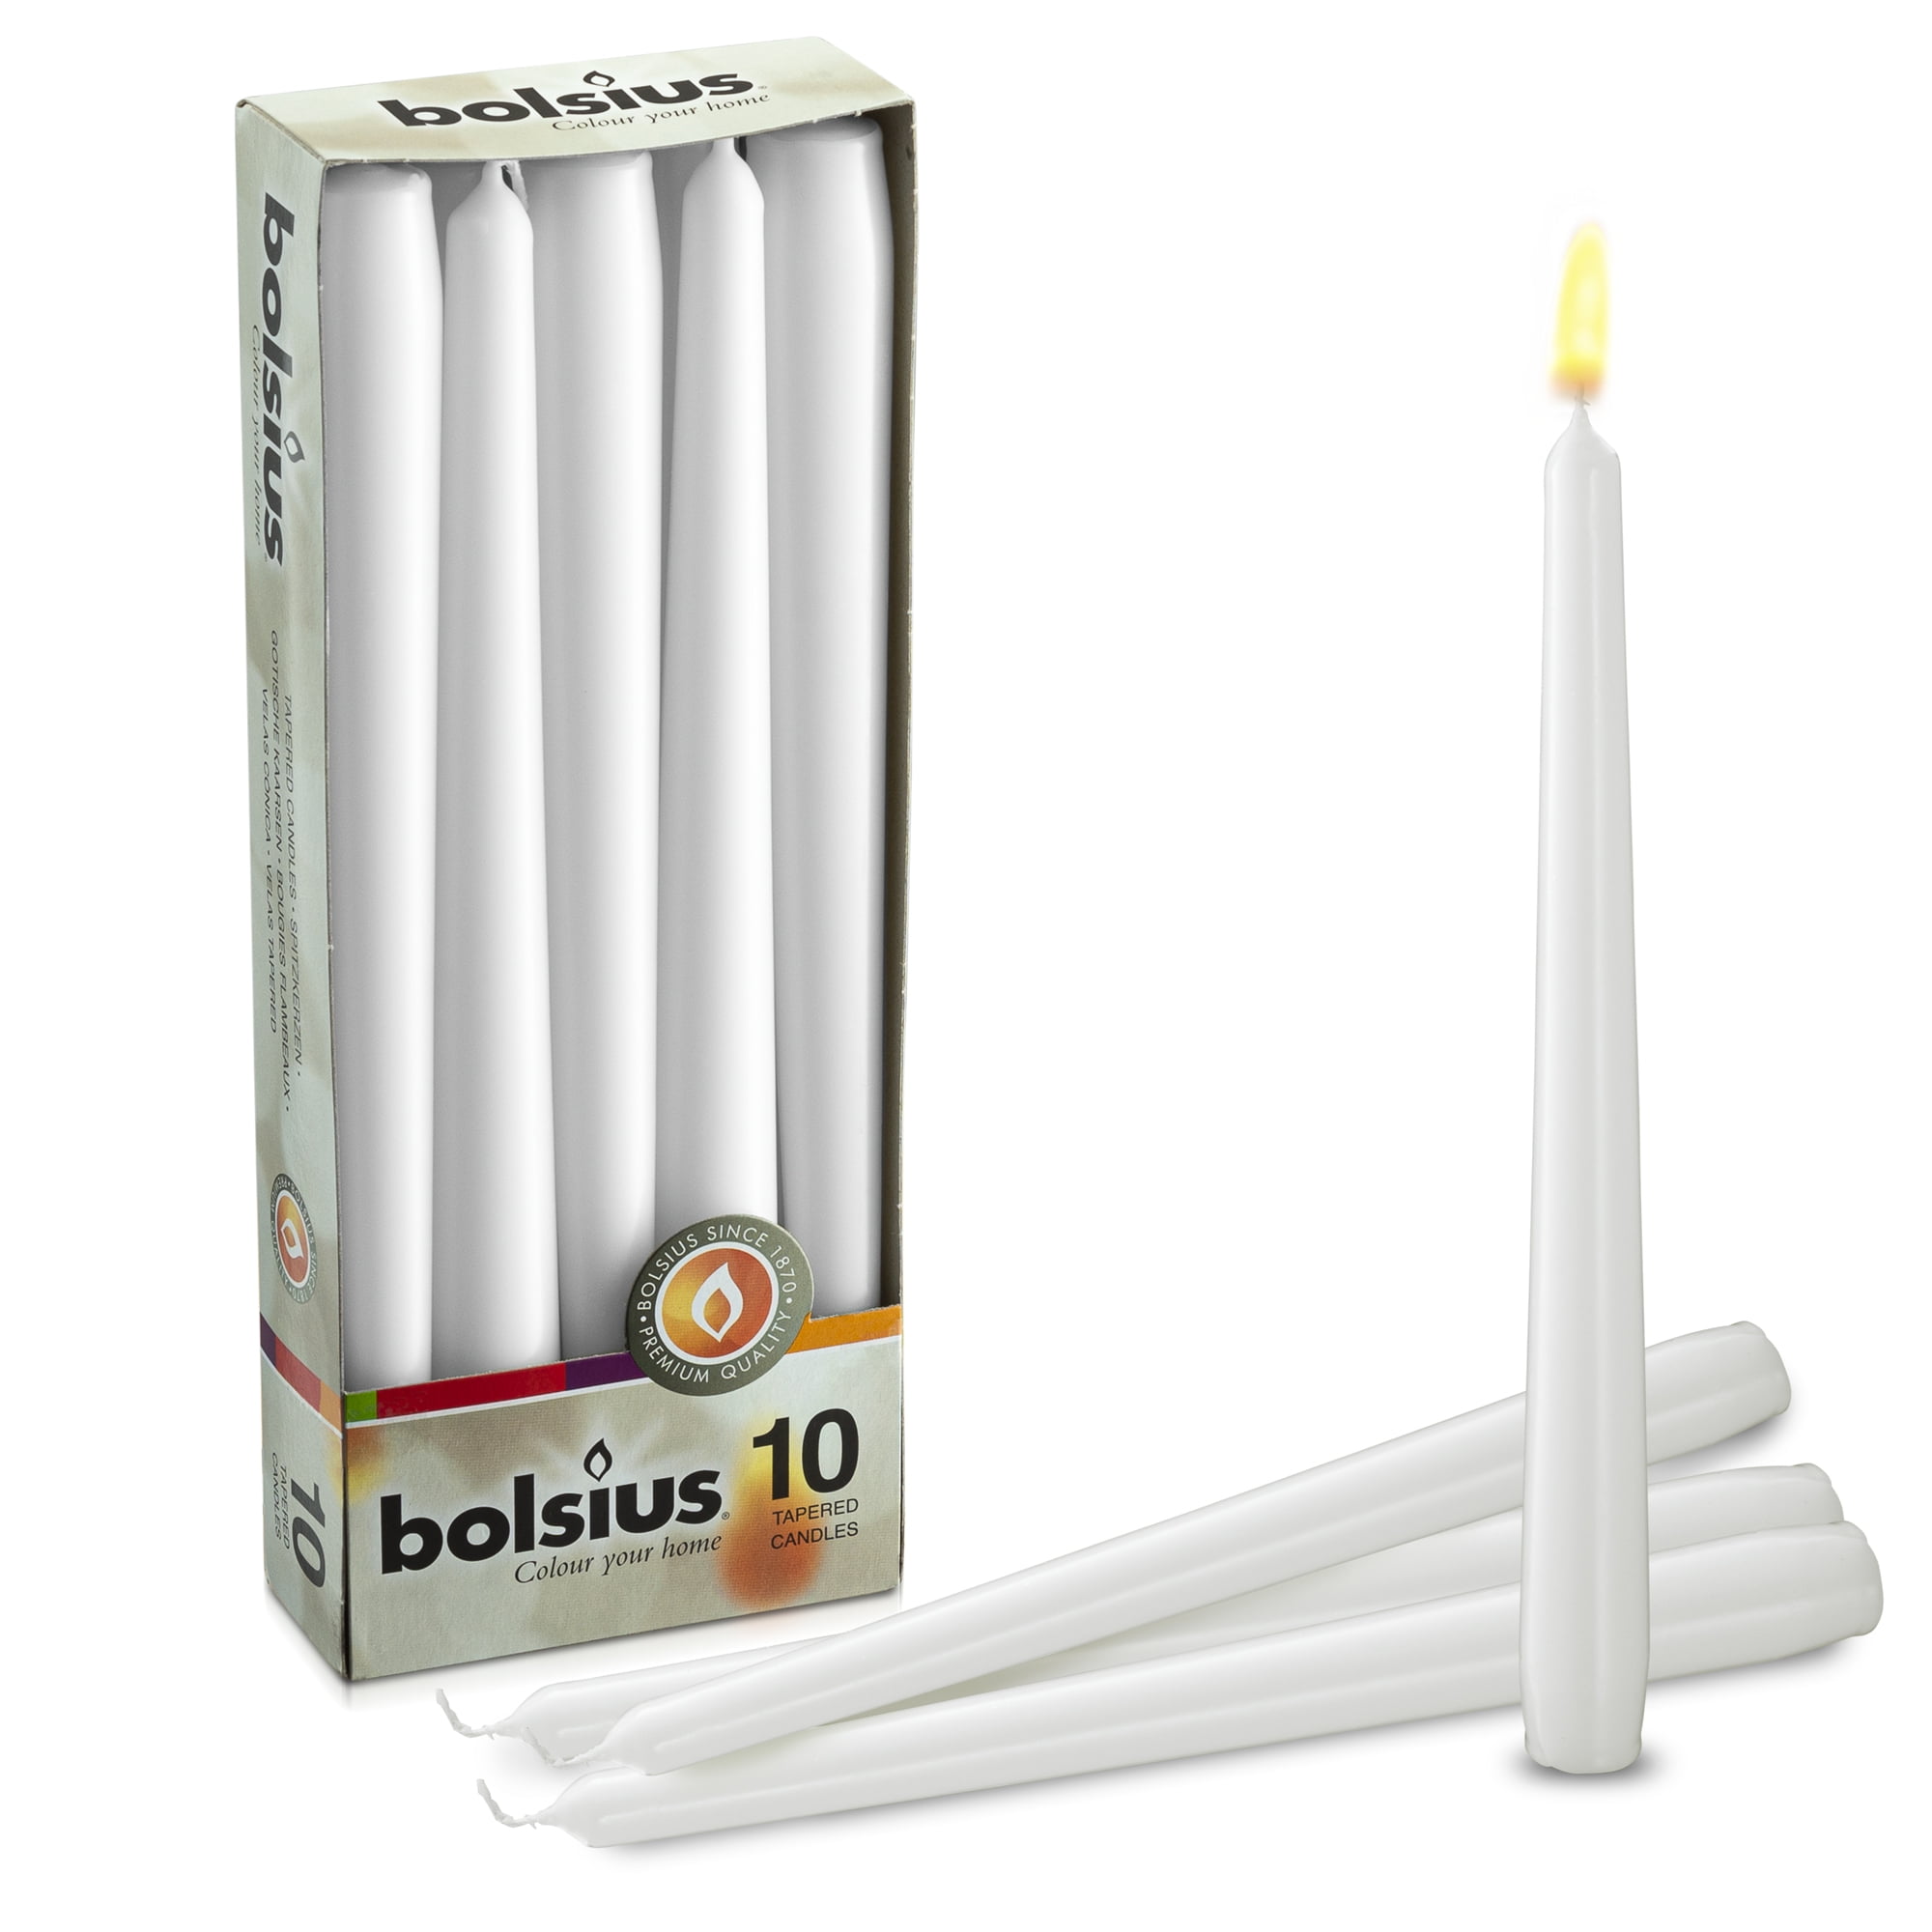 Bolsius Box Of 10 White Non-Drip Tapered Candles 7.5 Hour Burn Time 